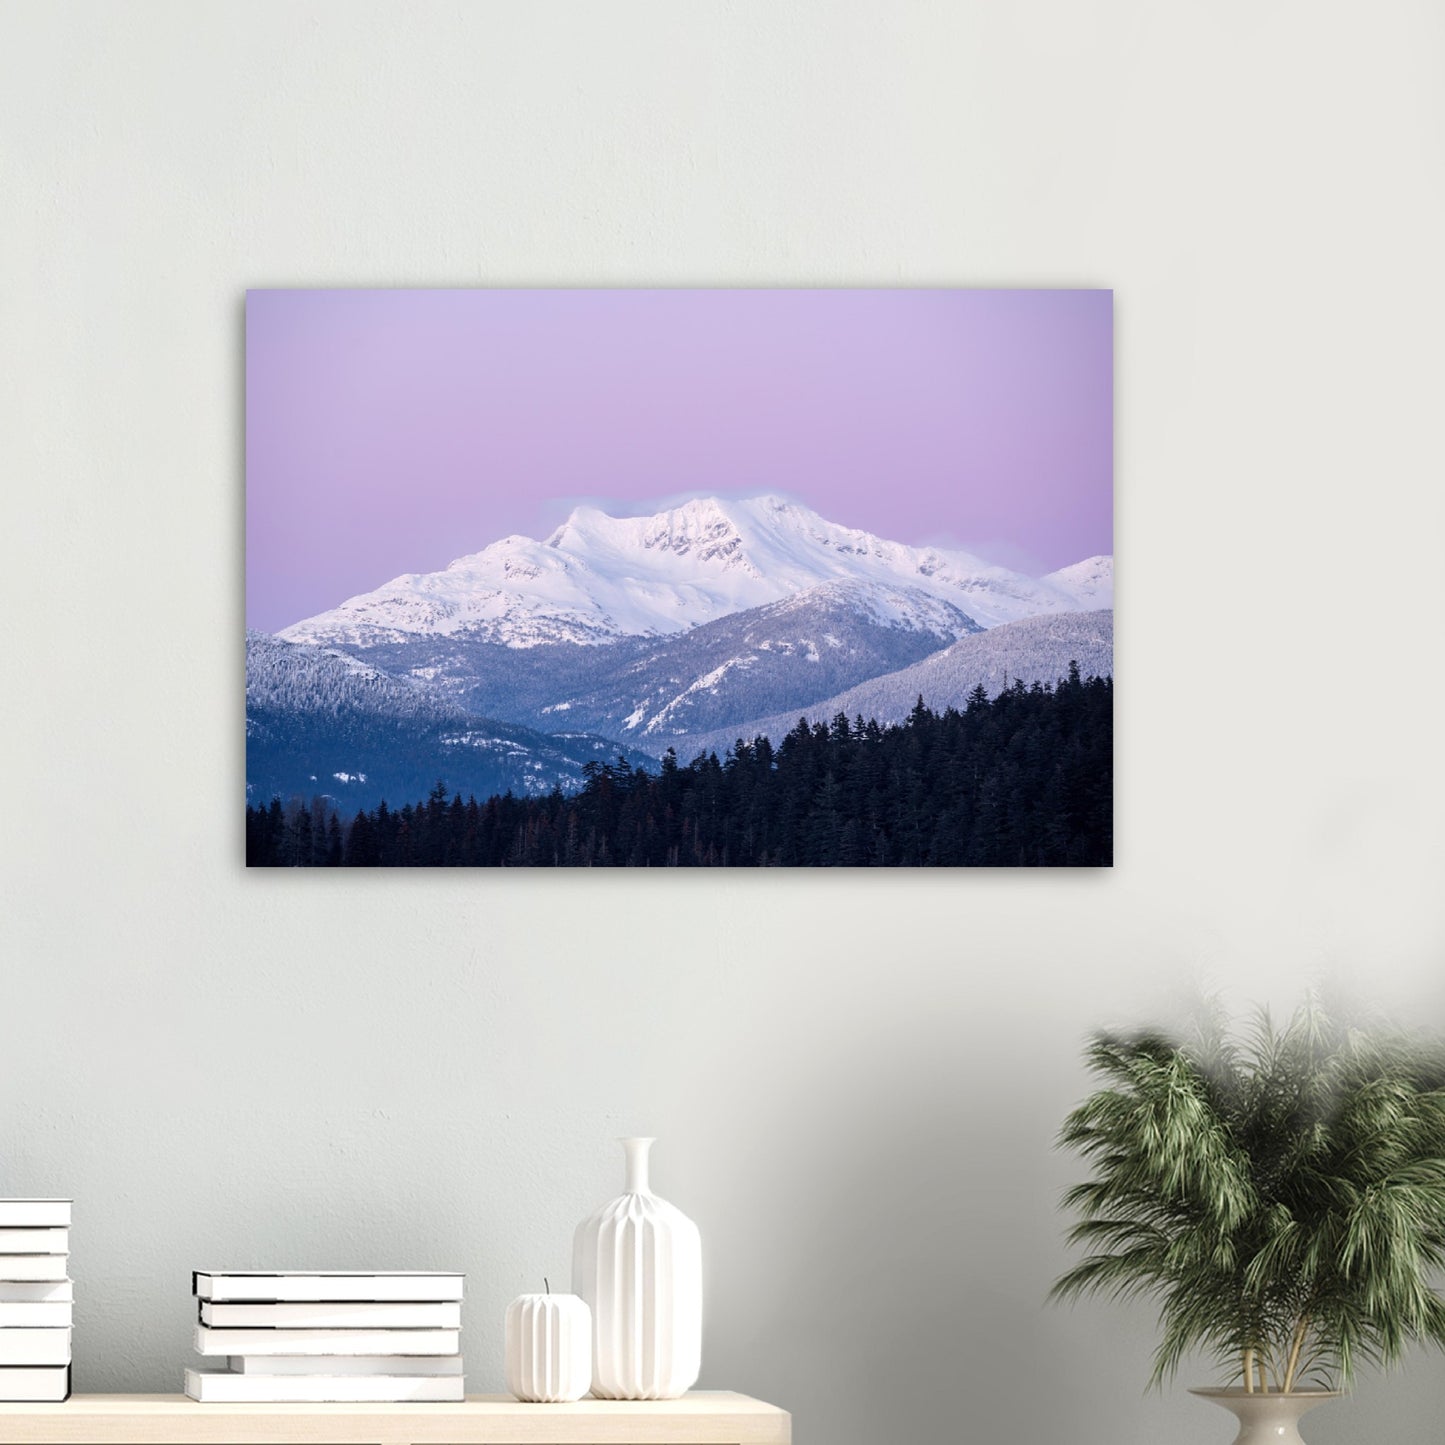 Sunset over Alta Lake with Mountain View - Landscape Metal / Aluminum Print - British Columbia, Canada